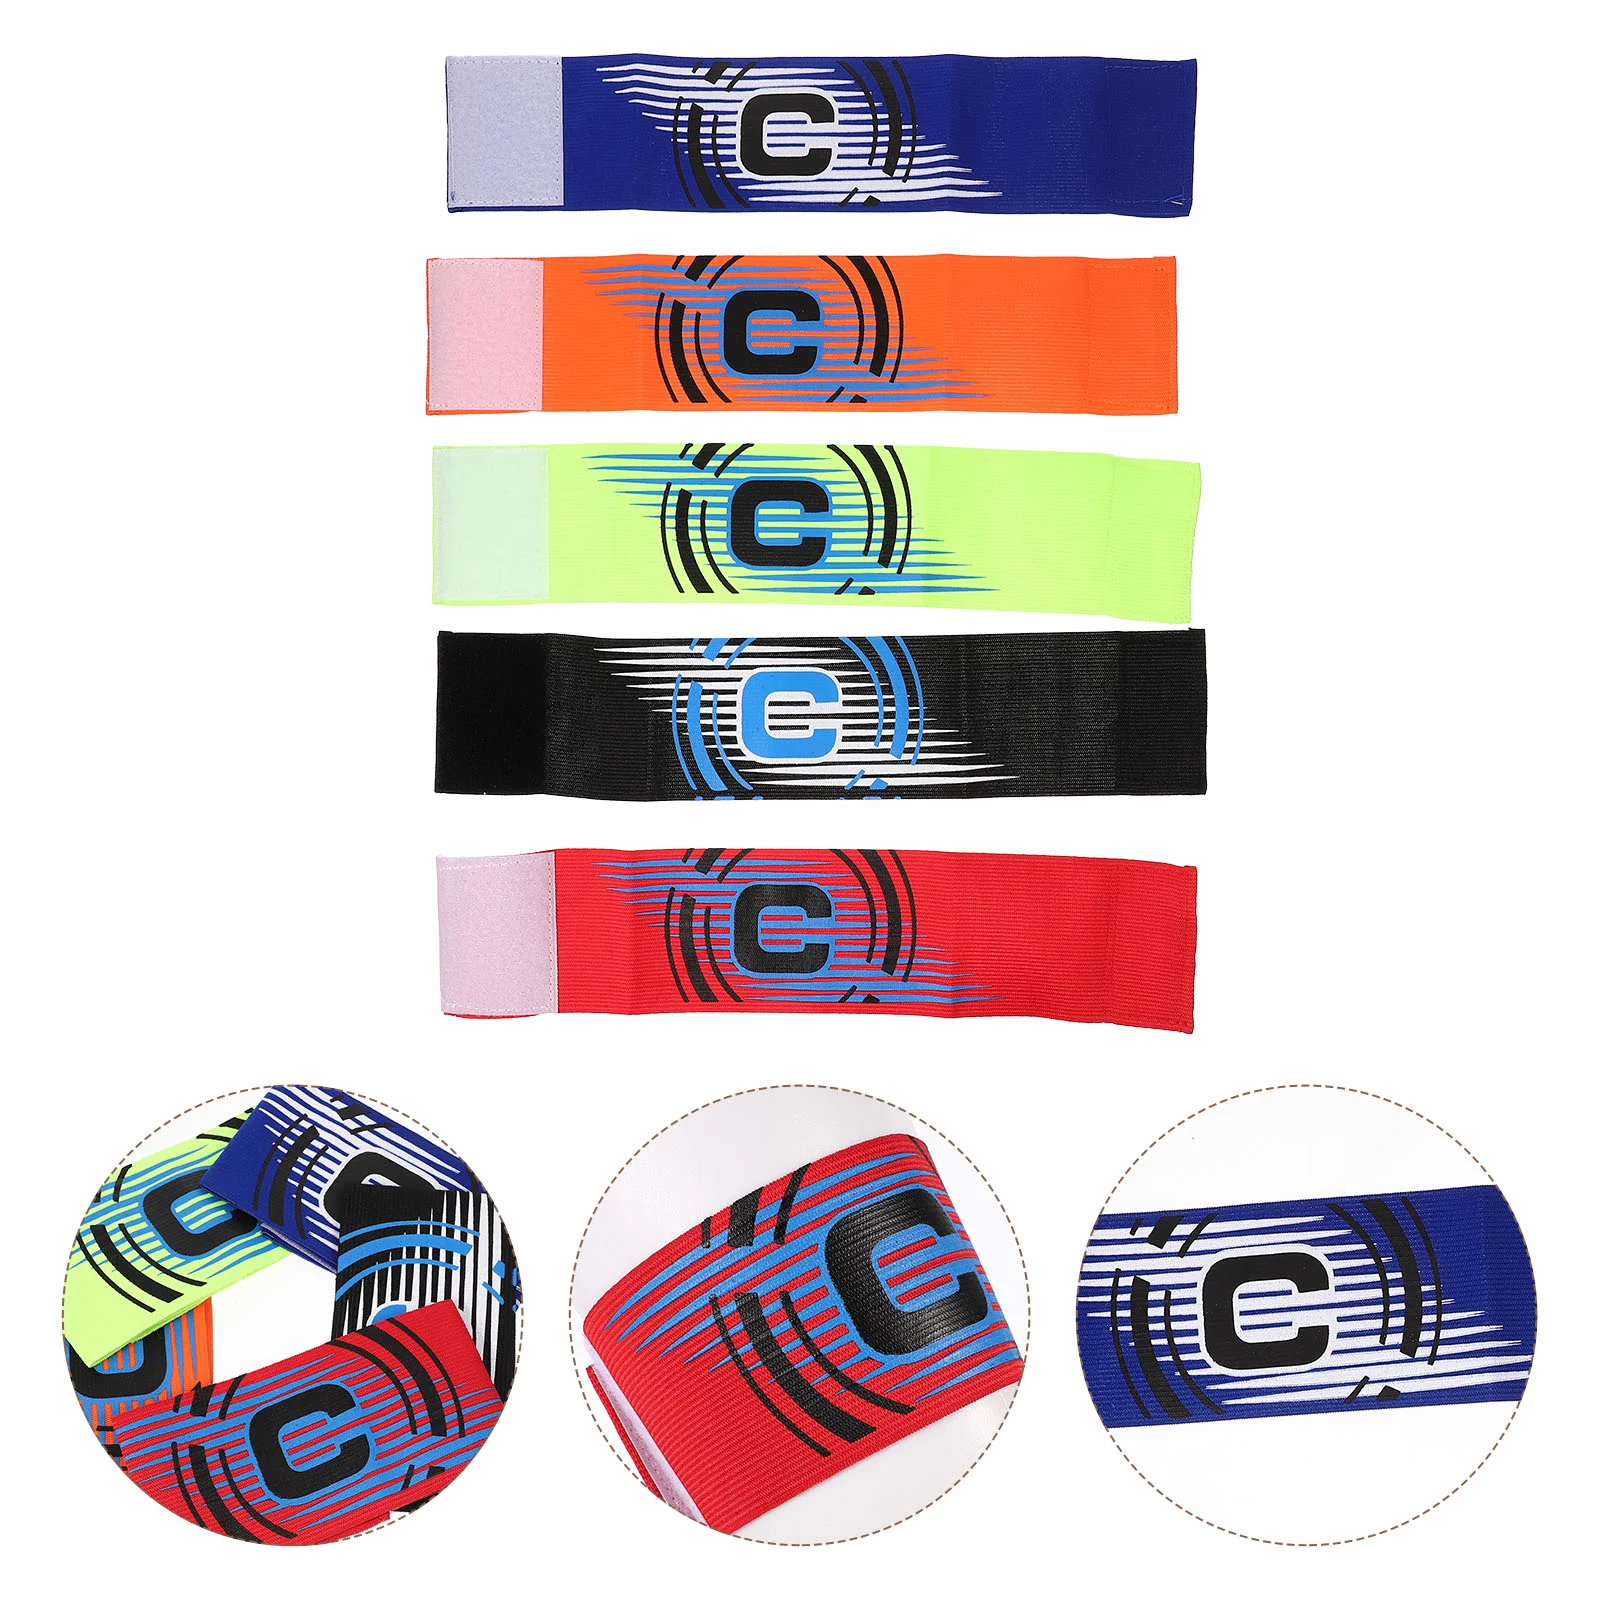 

Armbands Captain Football Soccer Team Bands Armband Leader Wear Mark Resistant Anti Sign Outdoor Match Arm Band Colored